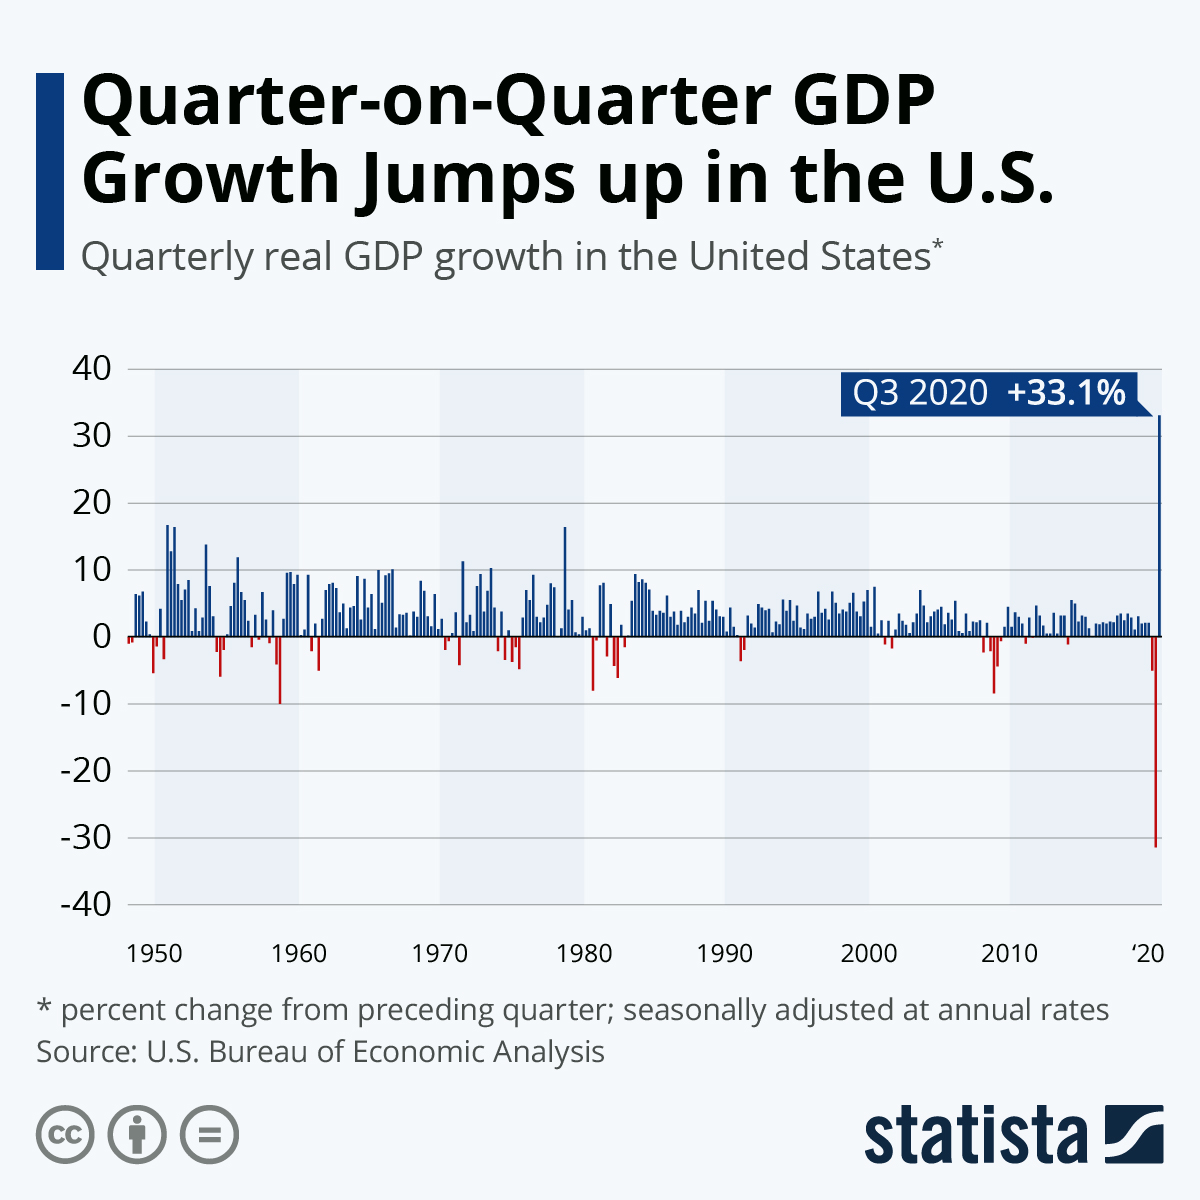 After Record Decline, QuarteronQuarter GDP Growth Jumps to Record